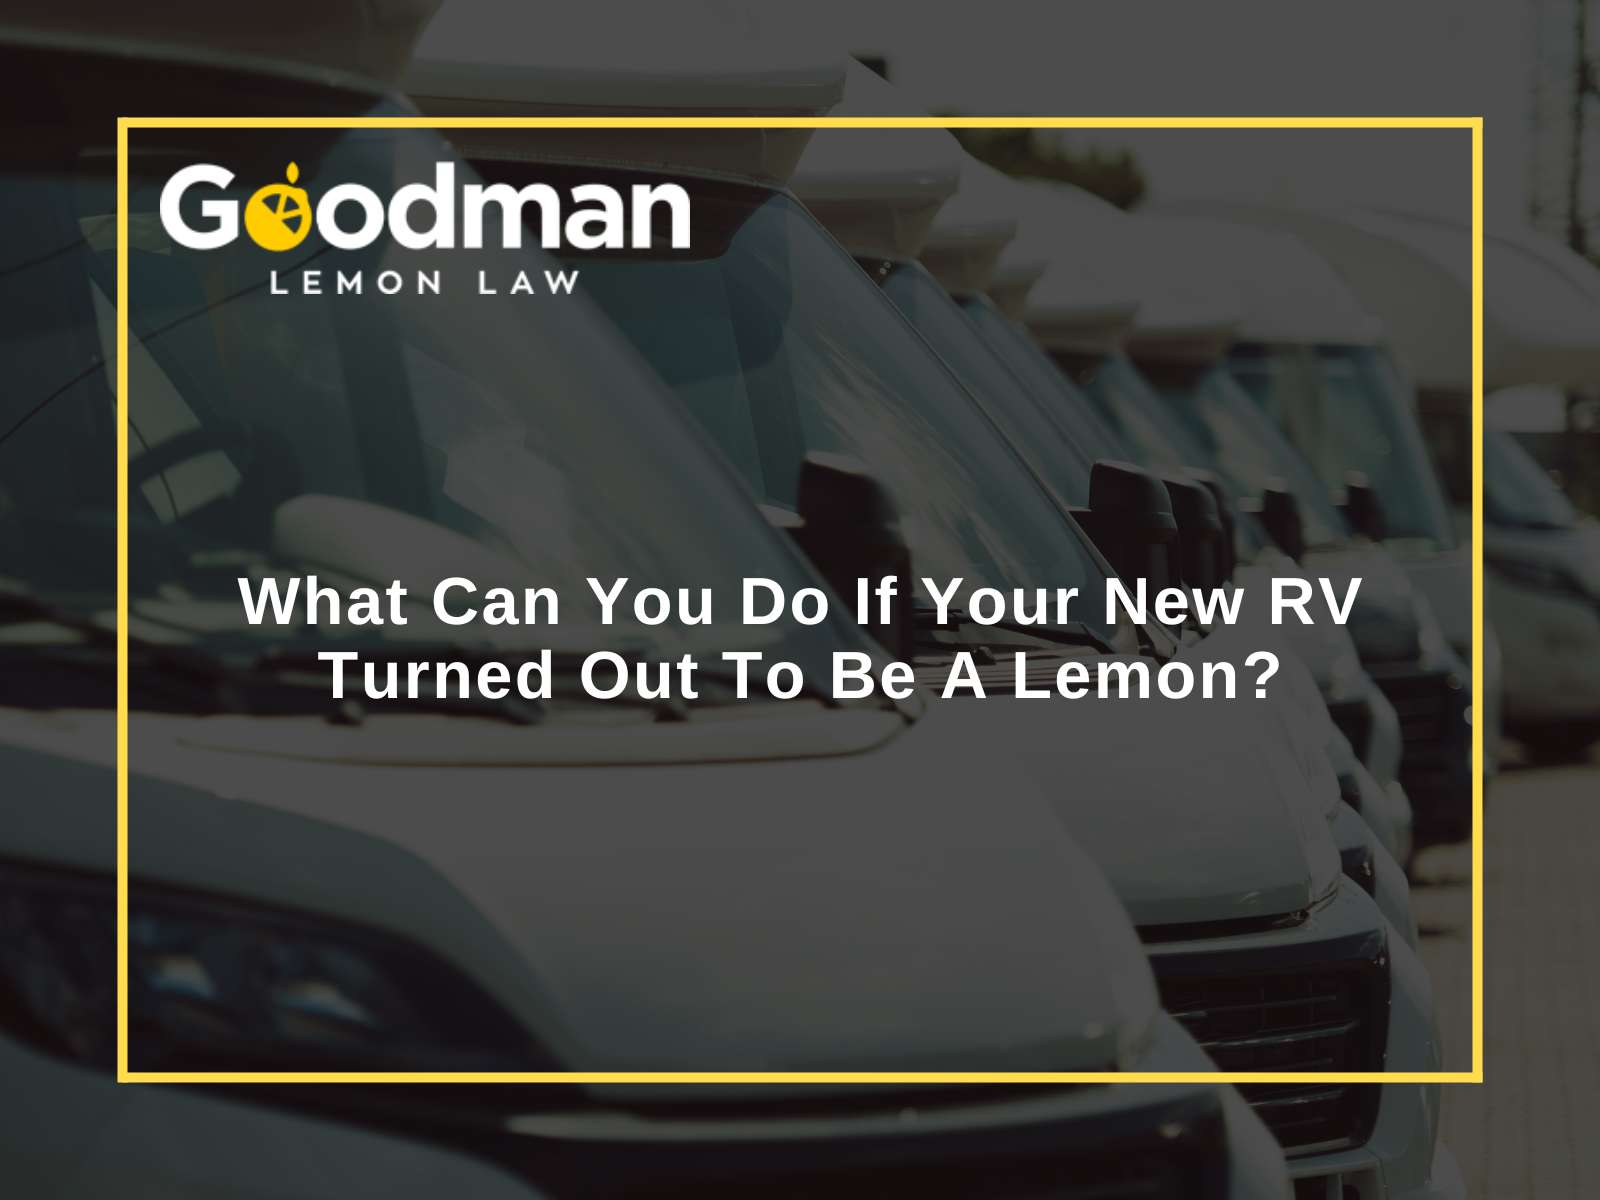 What Can You Do If Your New RV Turned Out To Be A Lemon